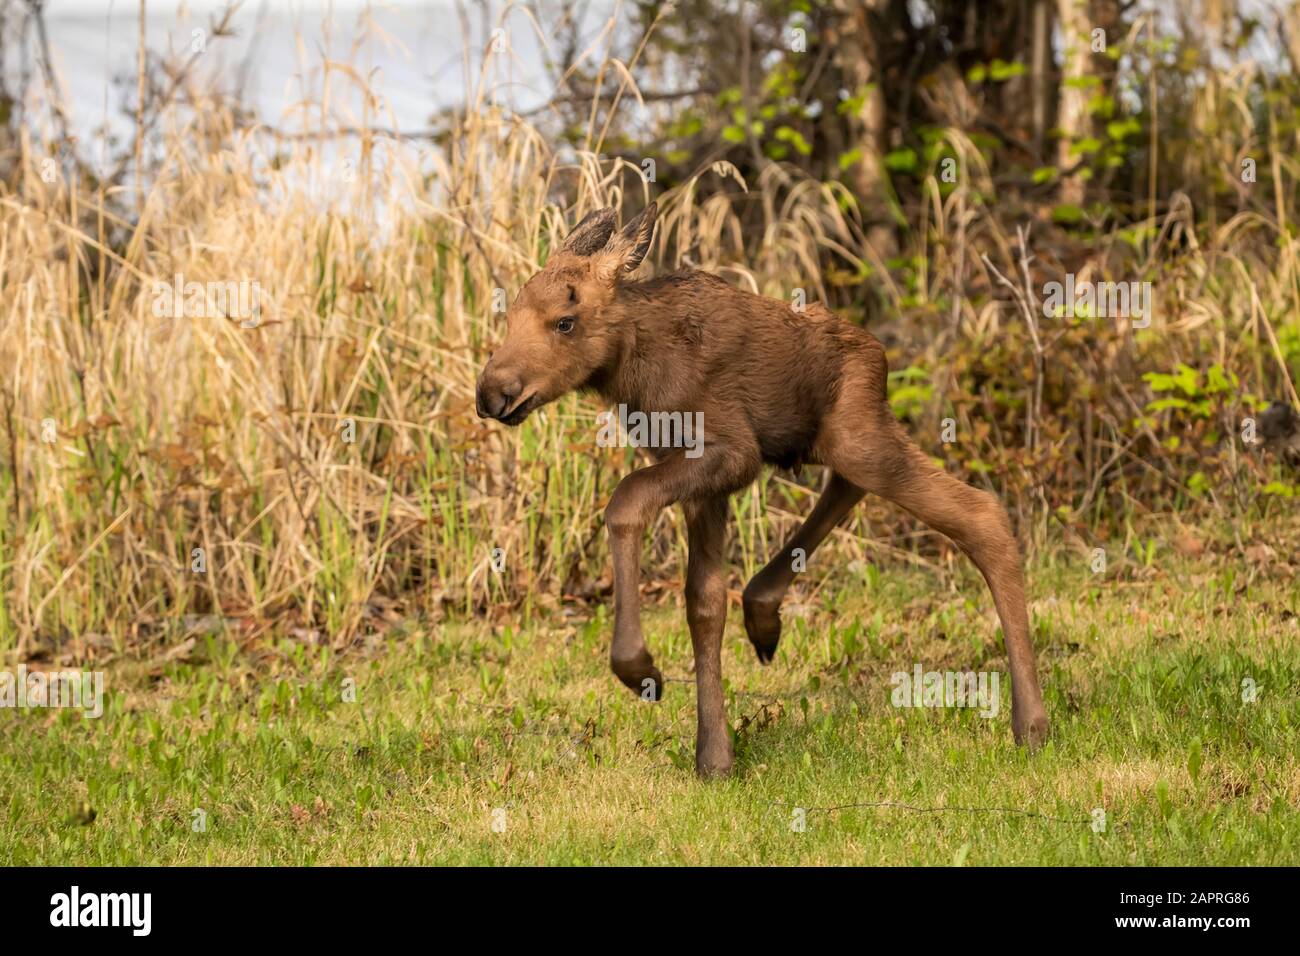 Young moose (Alces alces) calf runs around playing on grass, South-central Alaska; Anchorage, Alaska, United States of America Stock Photo